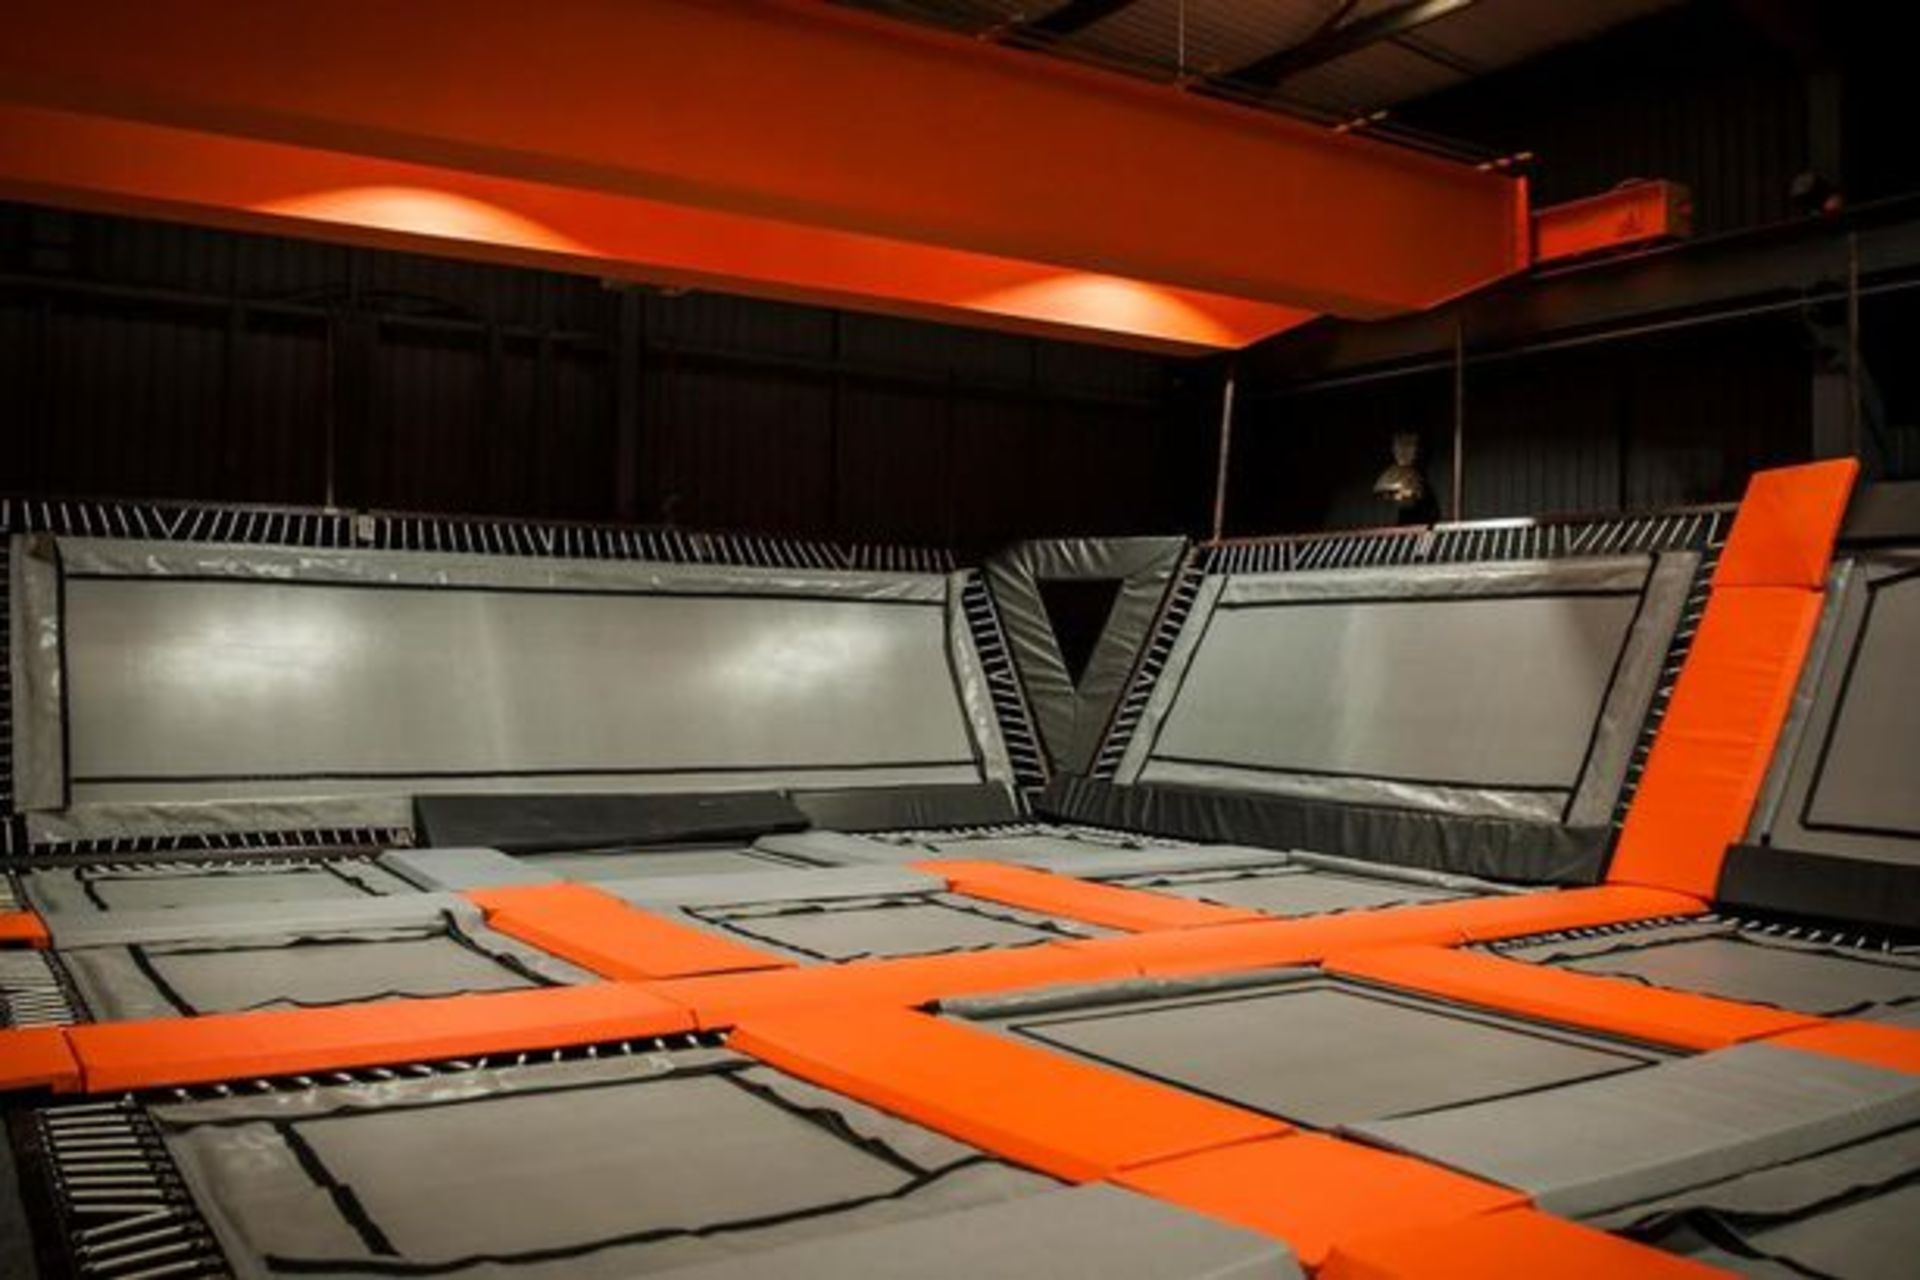 1 x Large Trampoline Park - Disassembled - Includes Dodgeball Arena And Jump Tower - CL766  - - Image 43 of 99